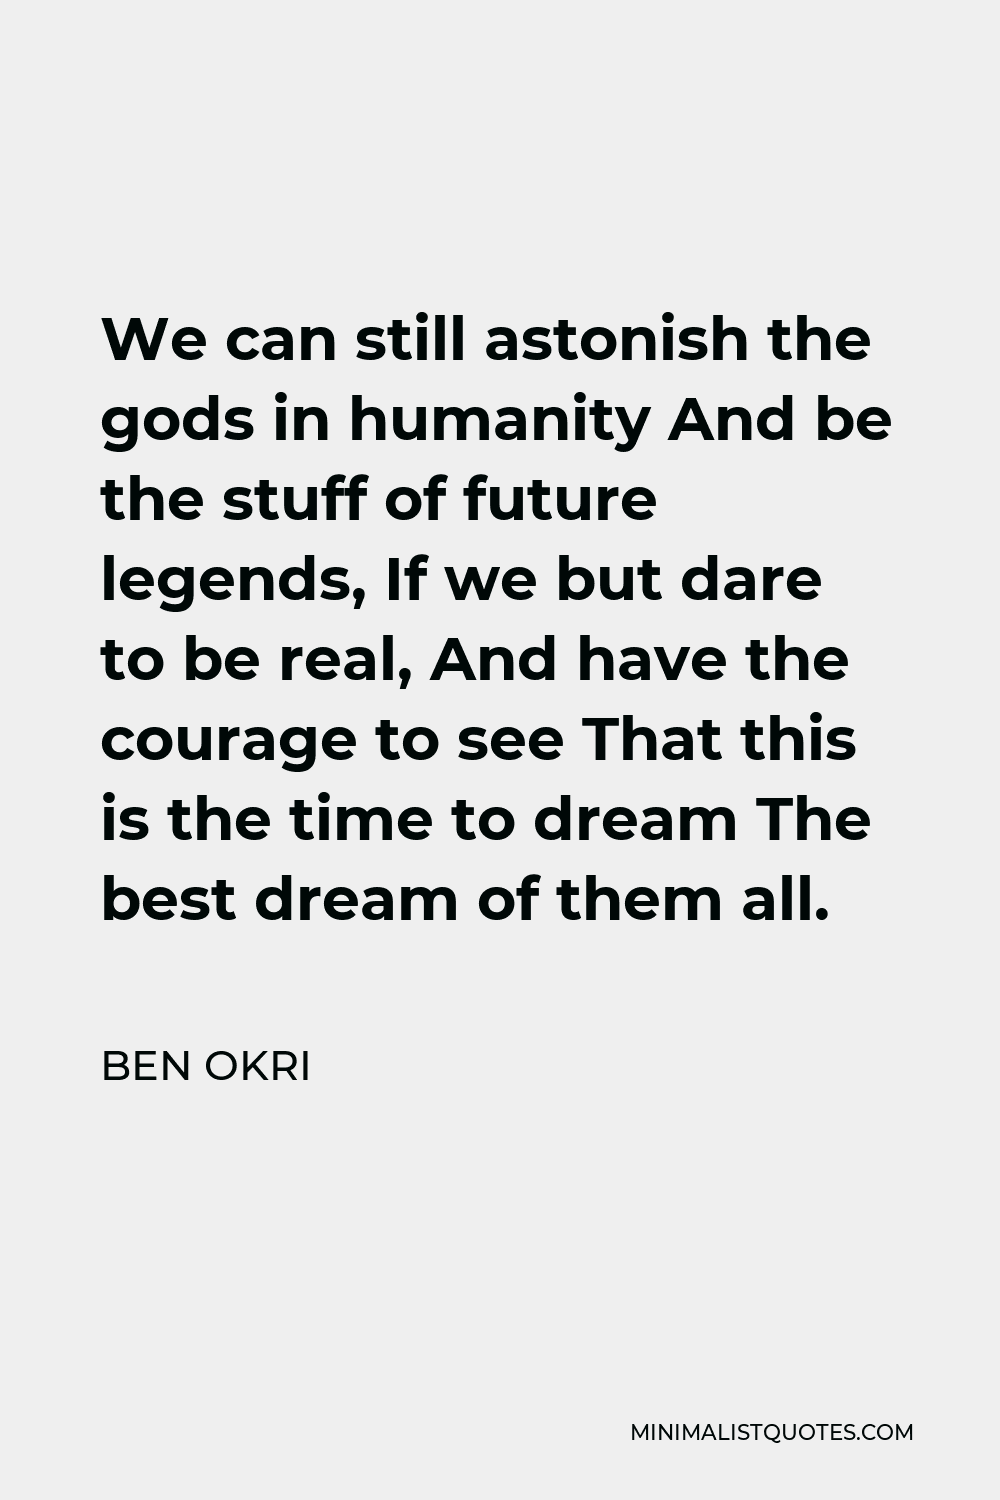 Ben Okri Quote - We can still astonish the gods in humanity And be the stuff of future legends, If we but dare to be real, And have the courage to see That this is the time to dream The best dream of them all.